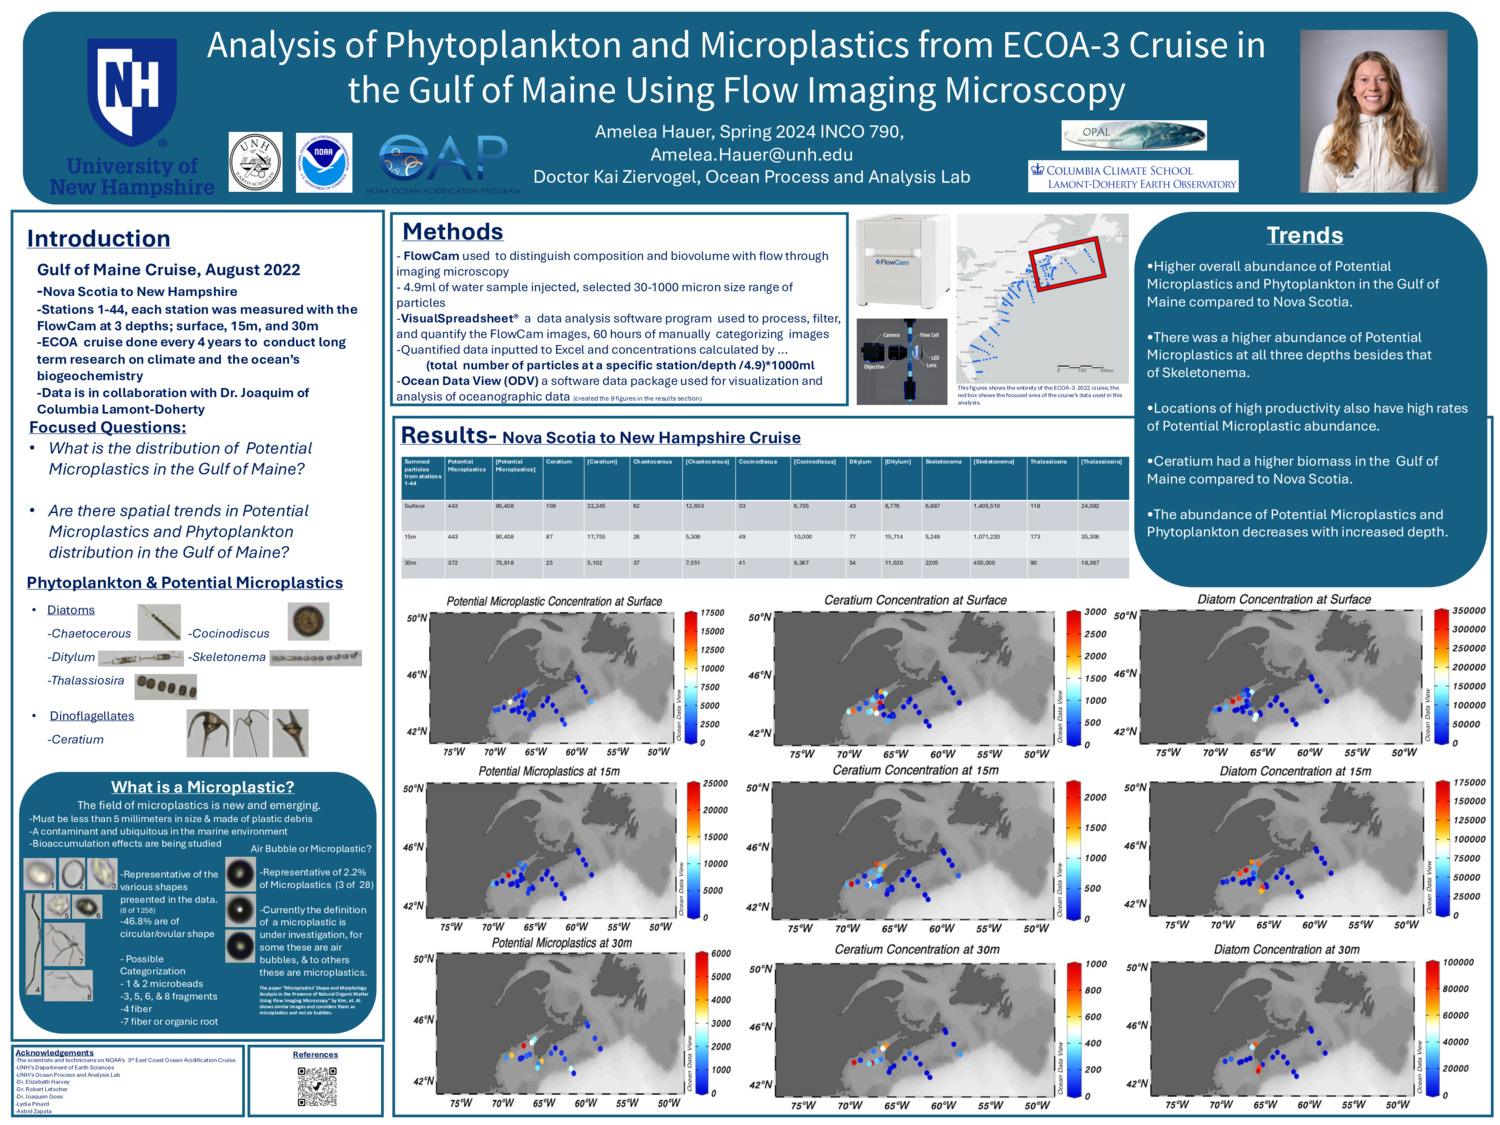 Analysis Of Phytoplankton And Microplastics From Ecoa-3 Cruise In The Gulf Of Maine Using Flow Imaging Microscopy by aeh1083